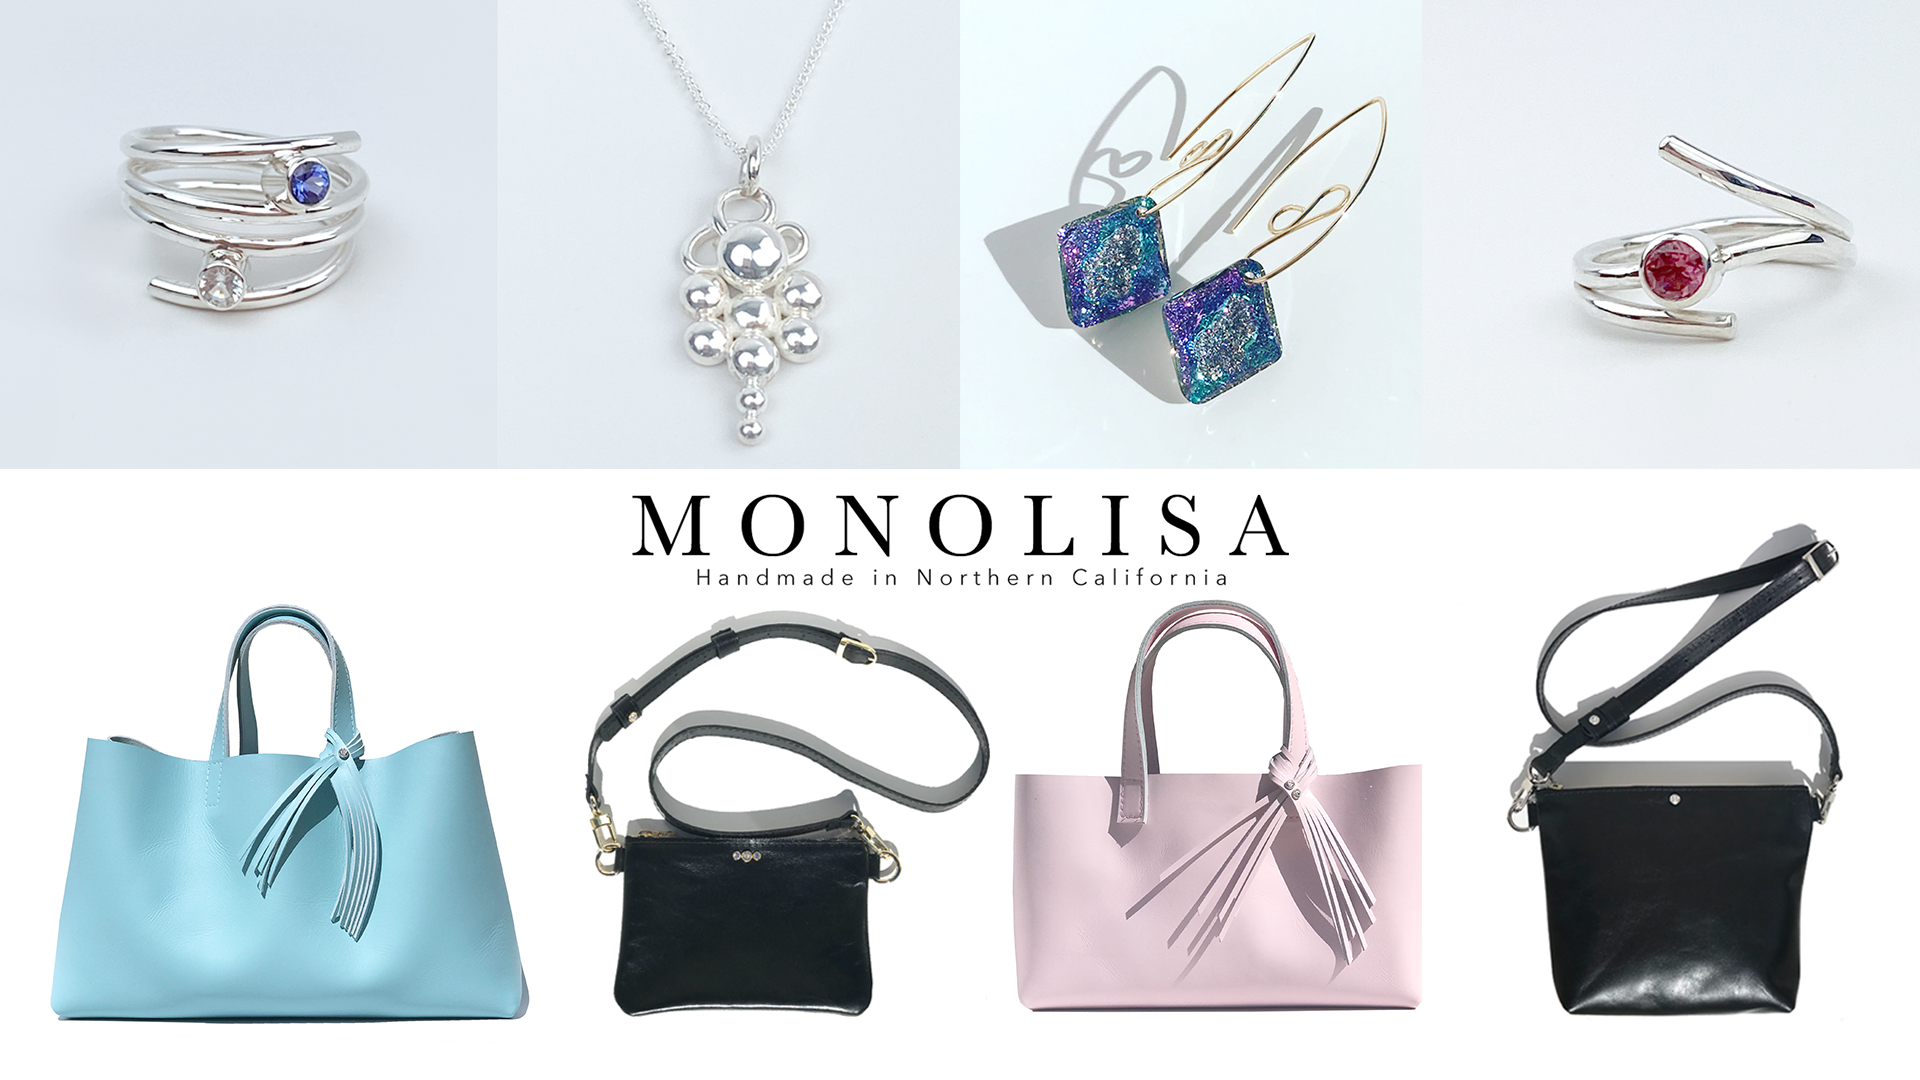 Danville Fallfest - Featuring MONOLISA Bags & Jewelry Made in USA